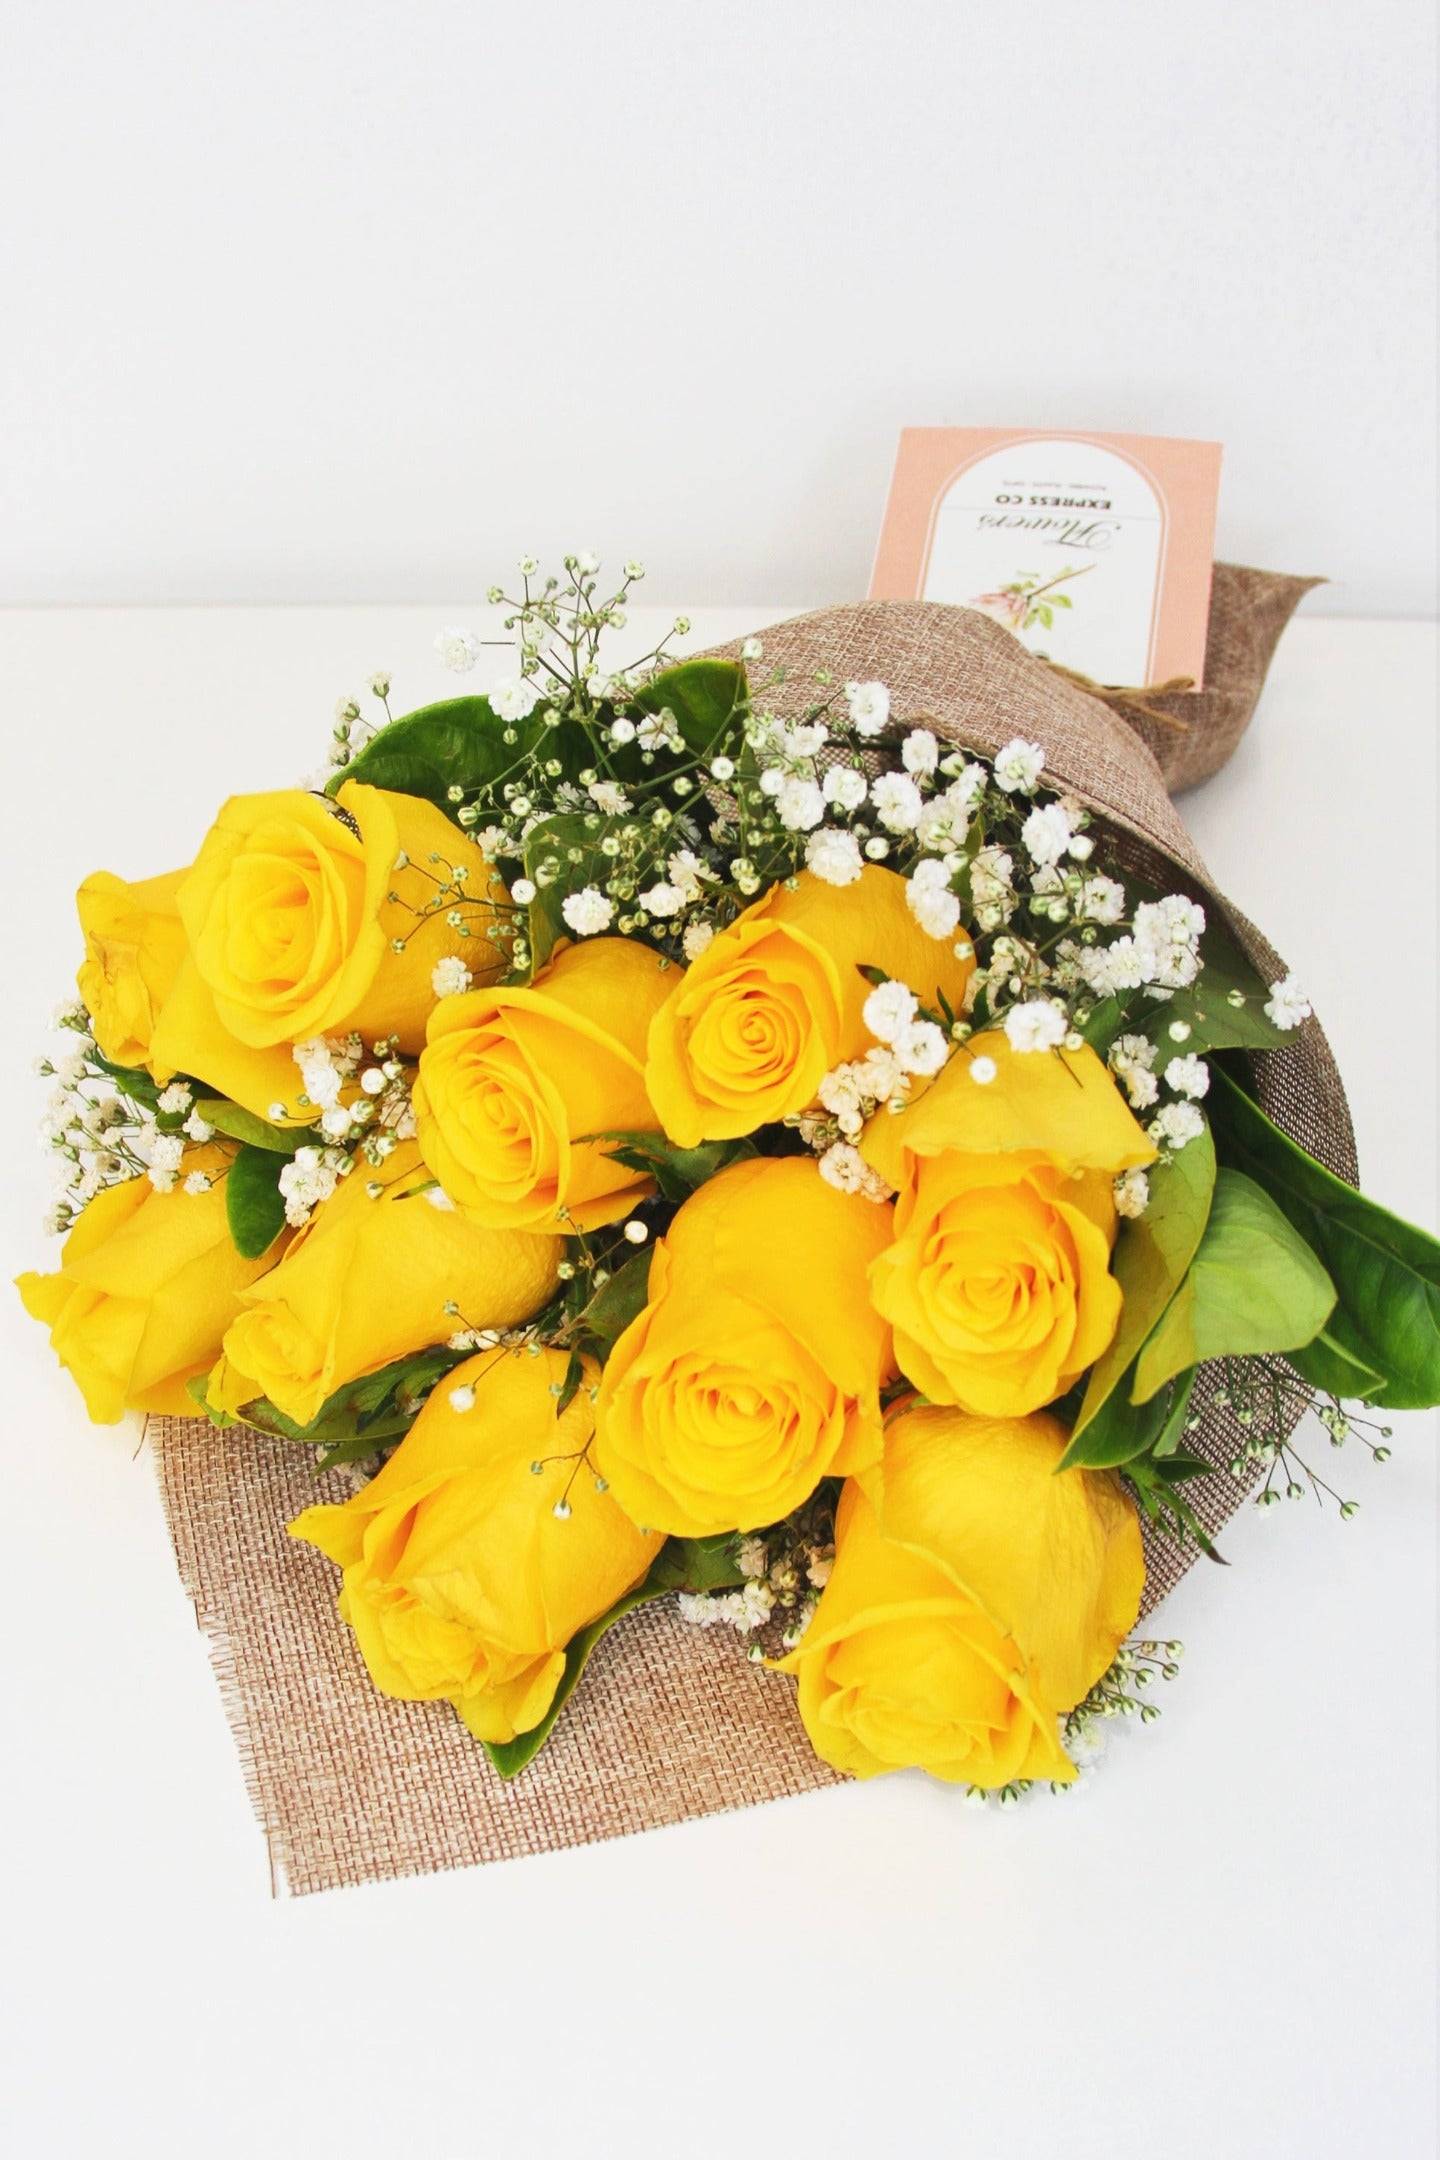 A bouquet of 10 yellow roses elegantly wrapped in a hessian-style mesh, available for delivery in Melbourne.